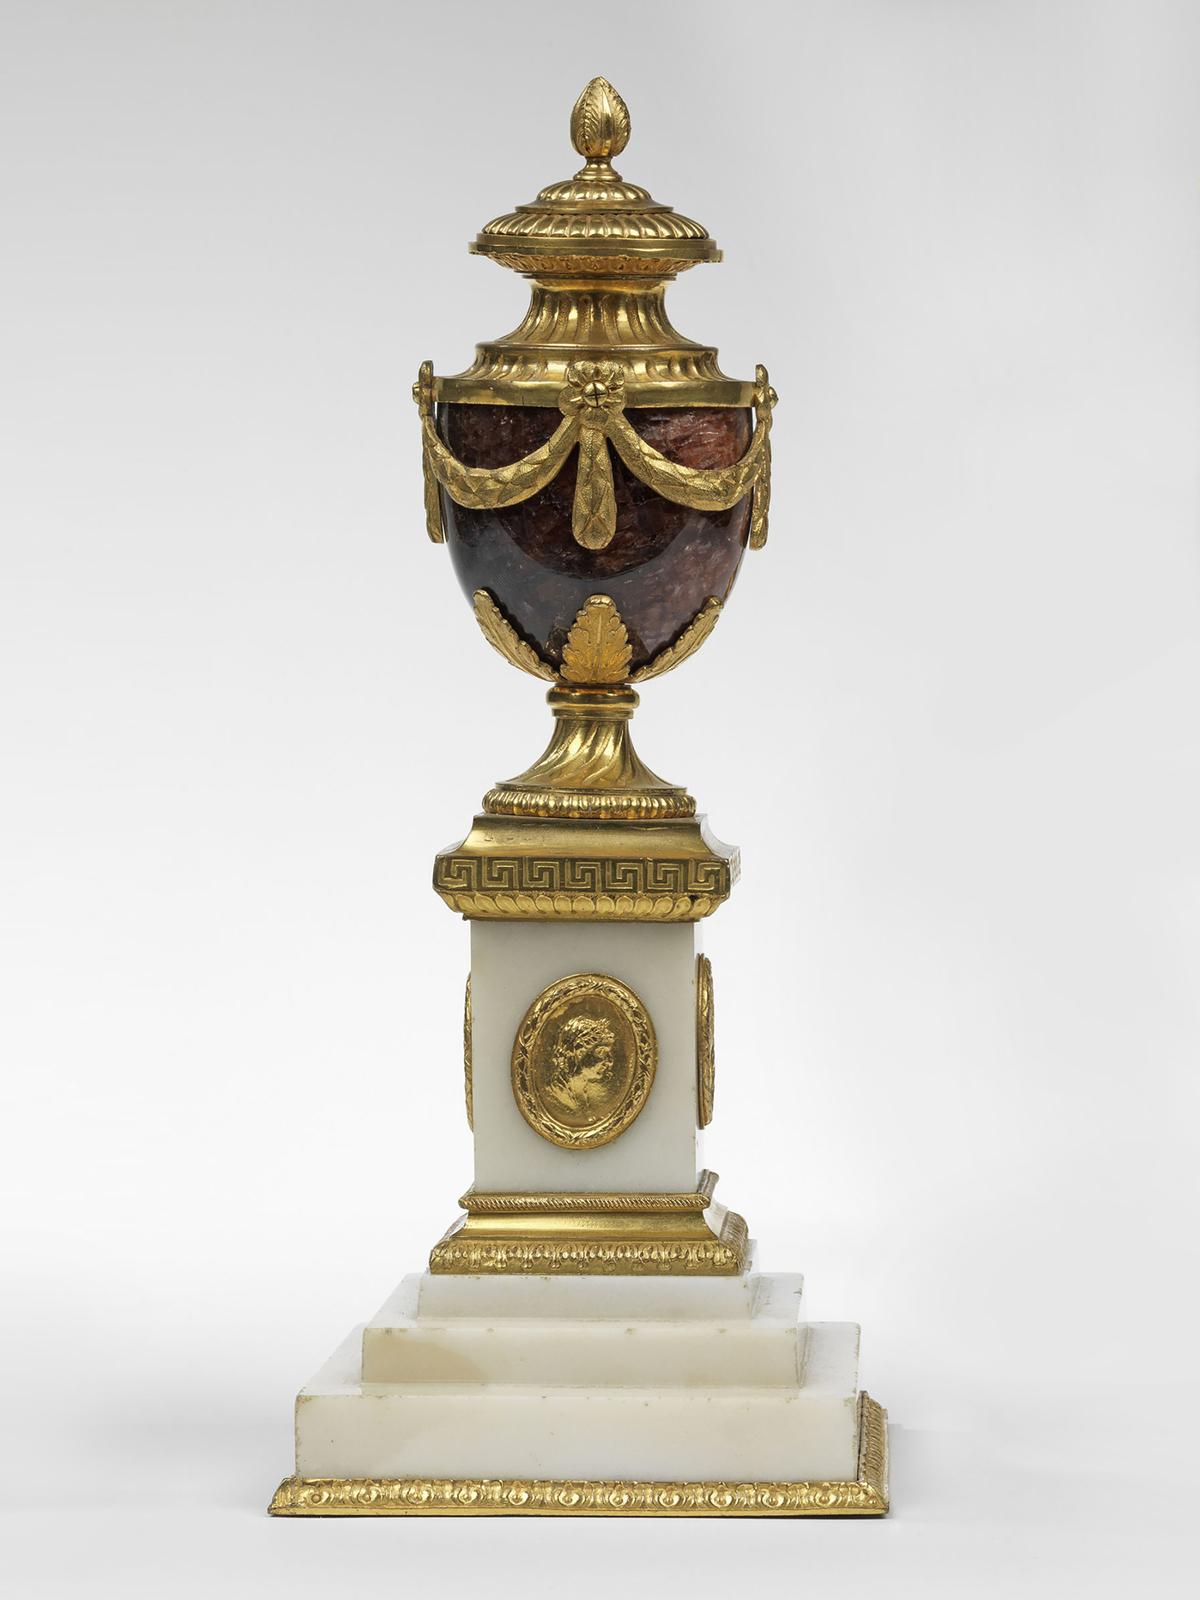 Each with a stamped three-step white marble pedestal, decorated with medallions of Ceres. The stamped Greek fret frieze round the top of the pedestal, the stem with spiral flutes, the acanthus leaf cradle holding the blue john vase body, and,